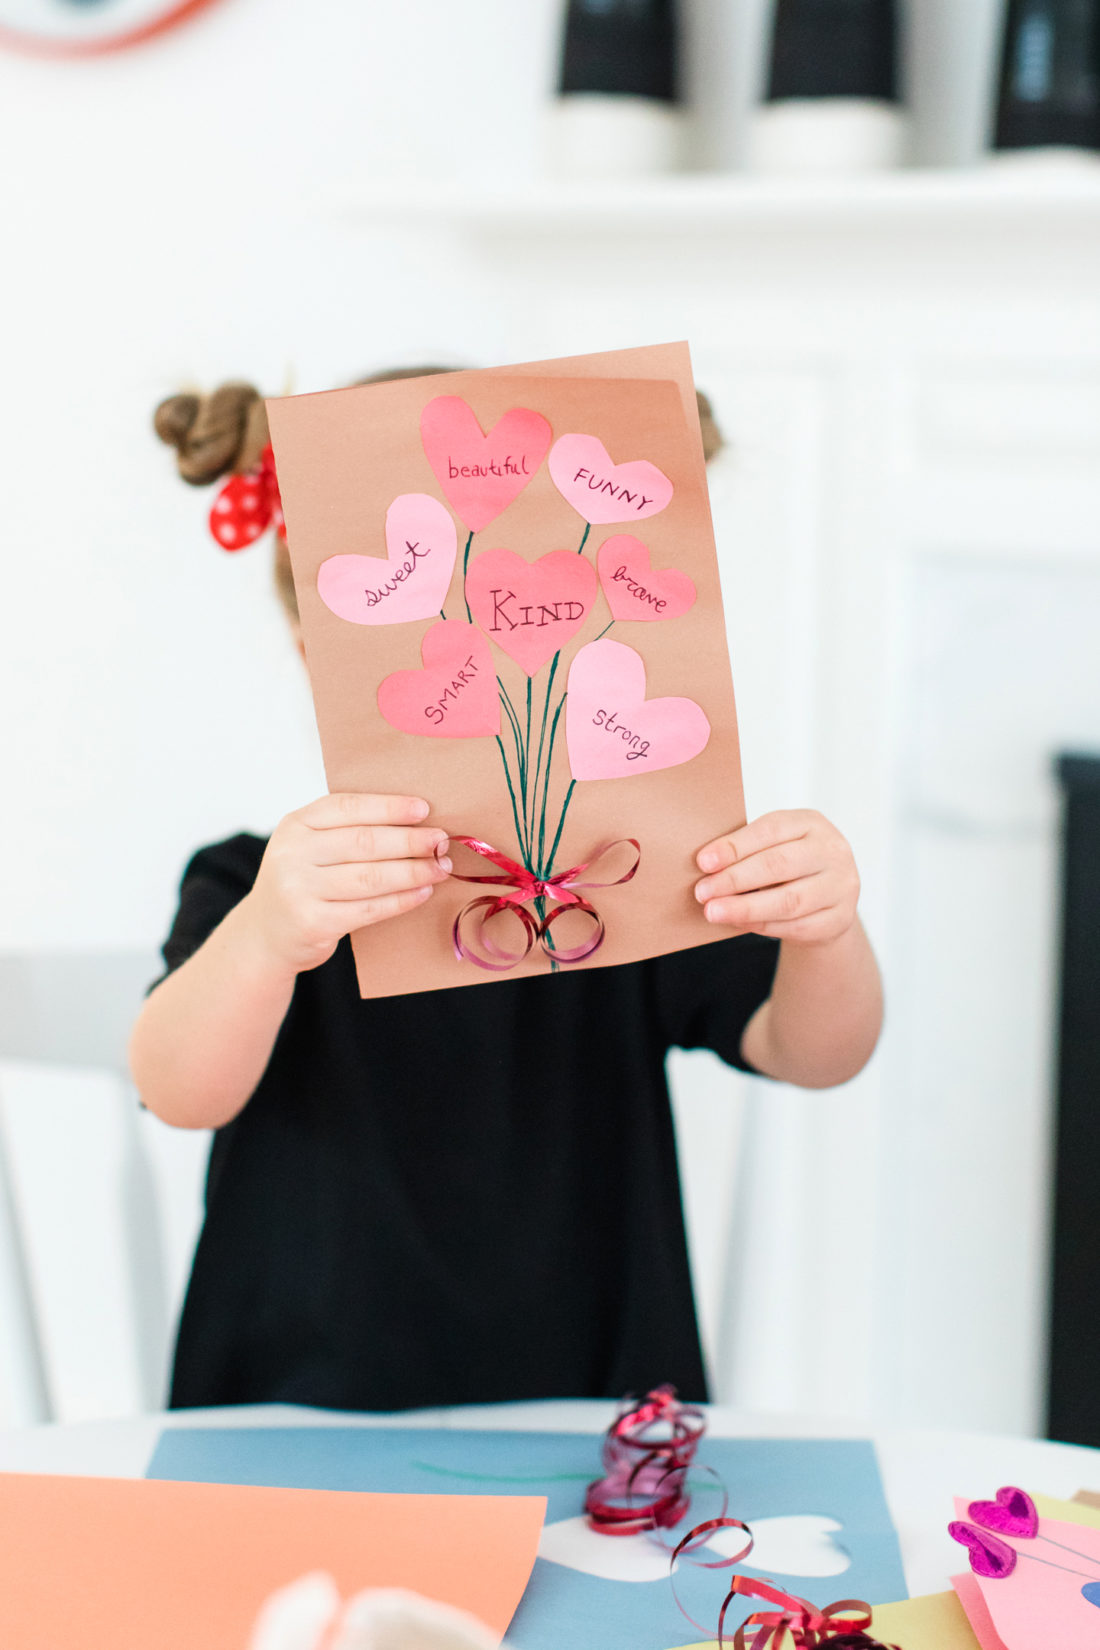 Marlowe Martino shares a homemade Valentine's Day card featuring a cutout heart bouquet on the front